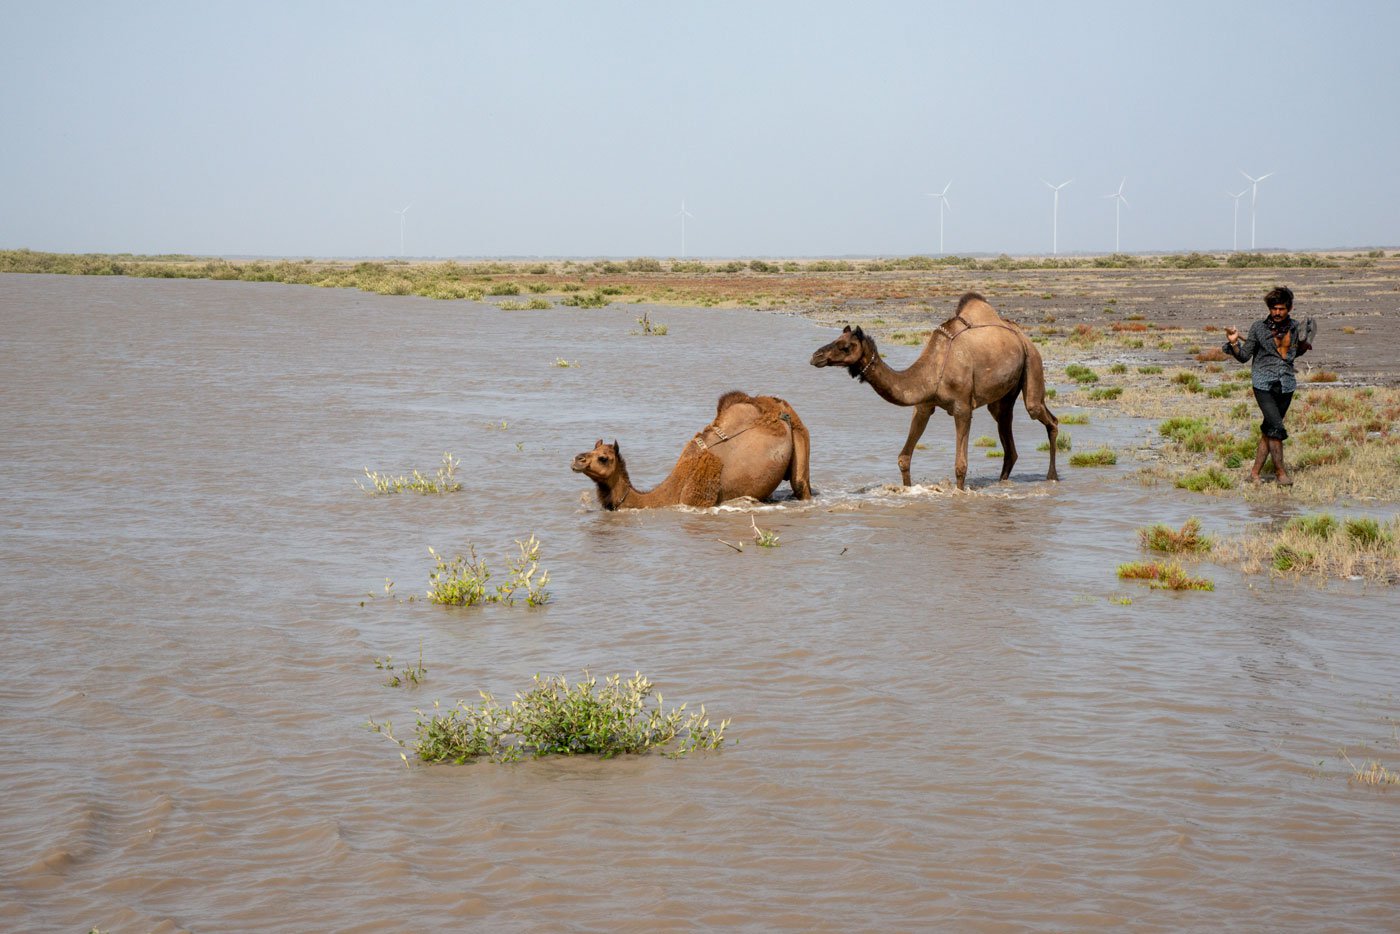 Kharai camels can swim a distance of 3 to 5 kilometres in a day